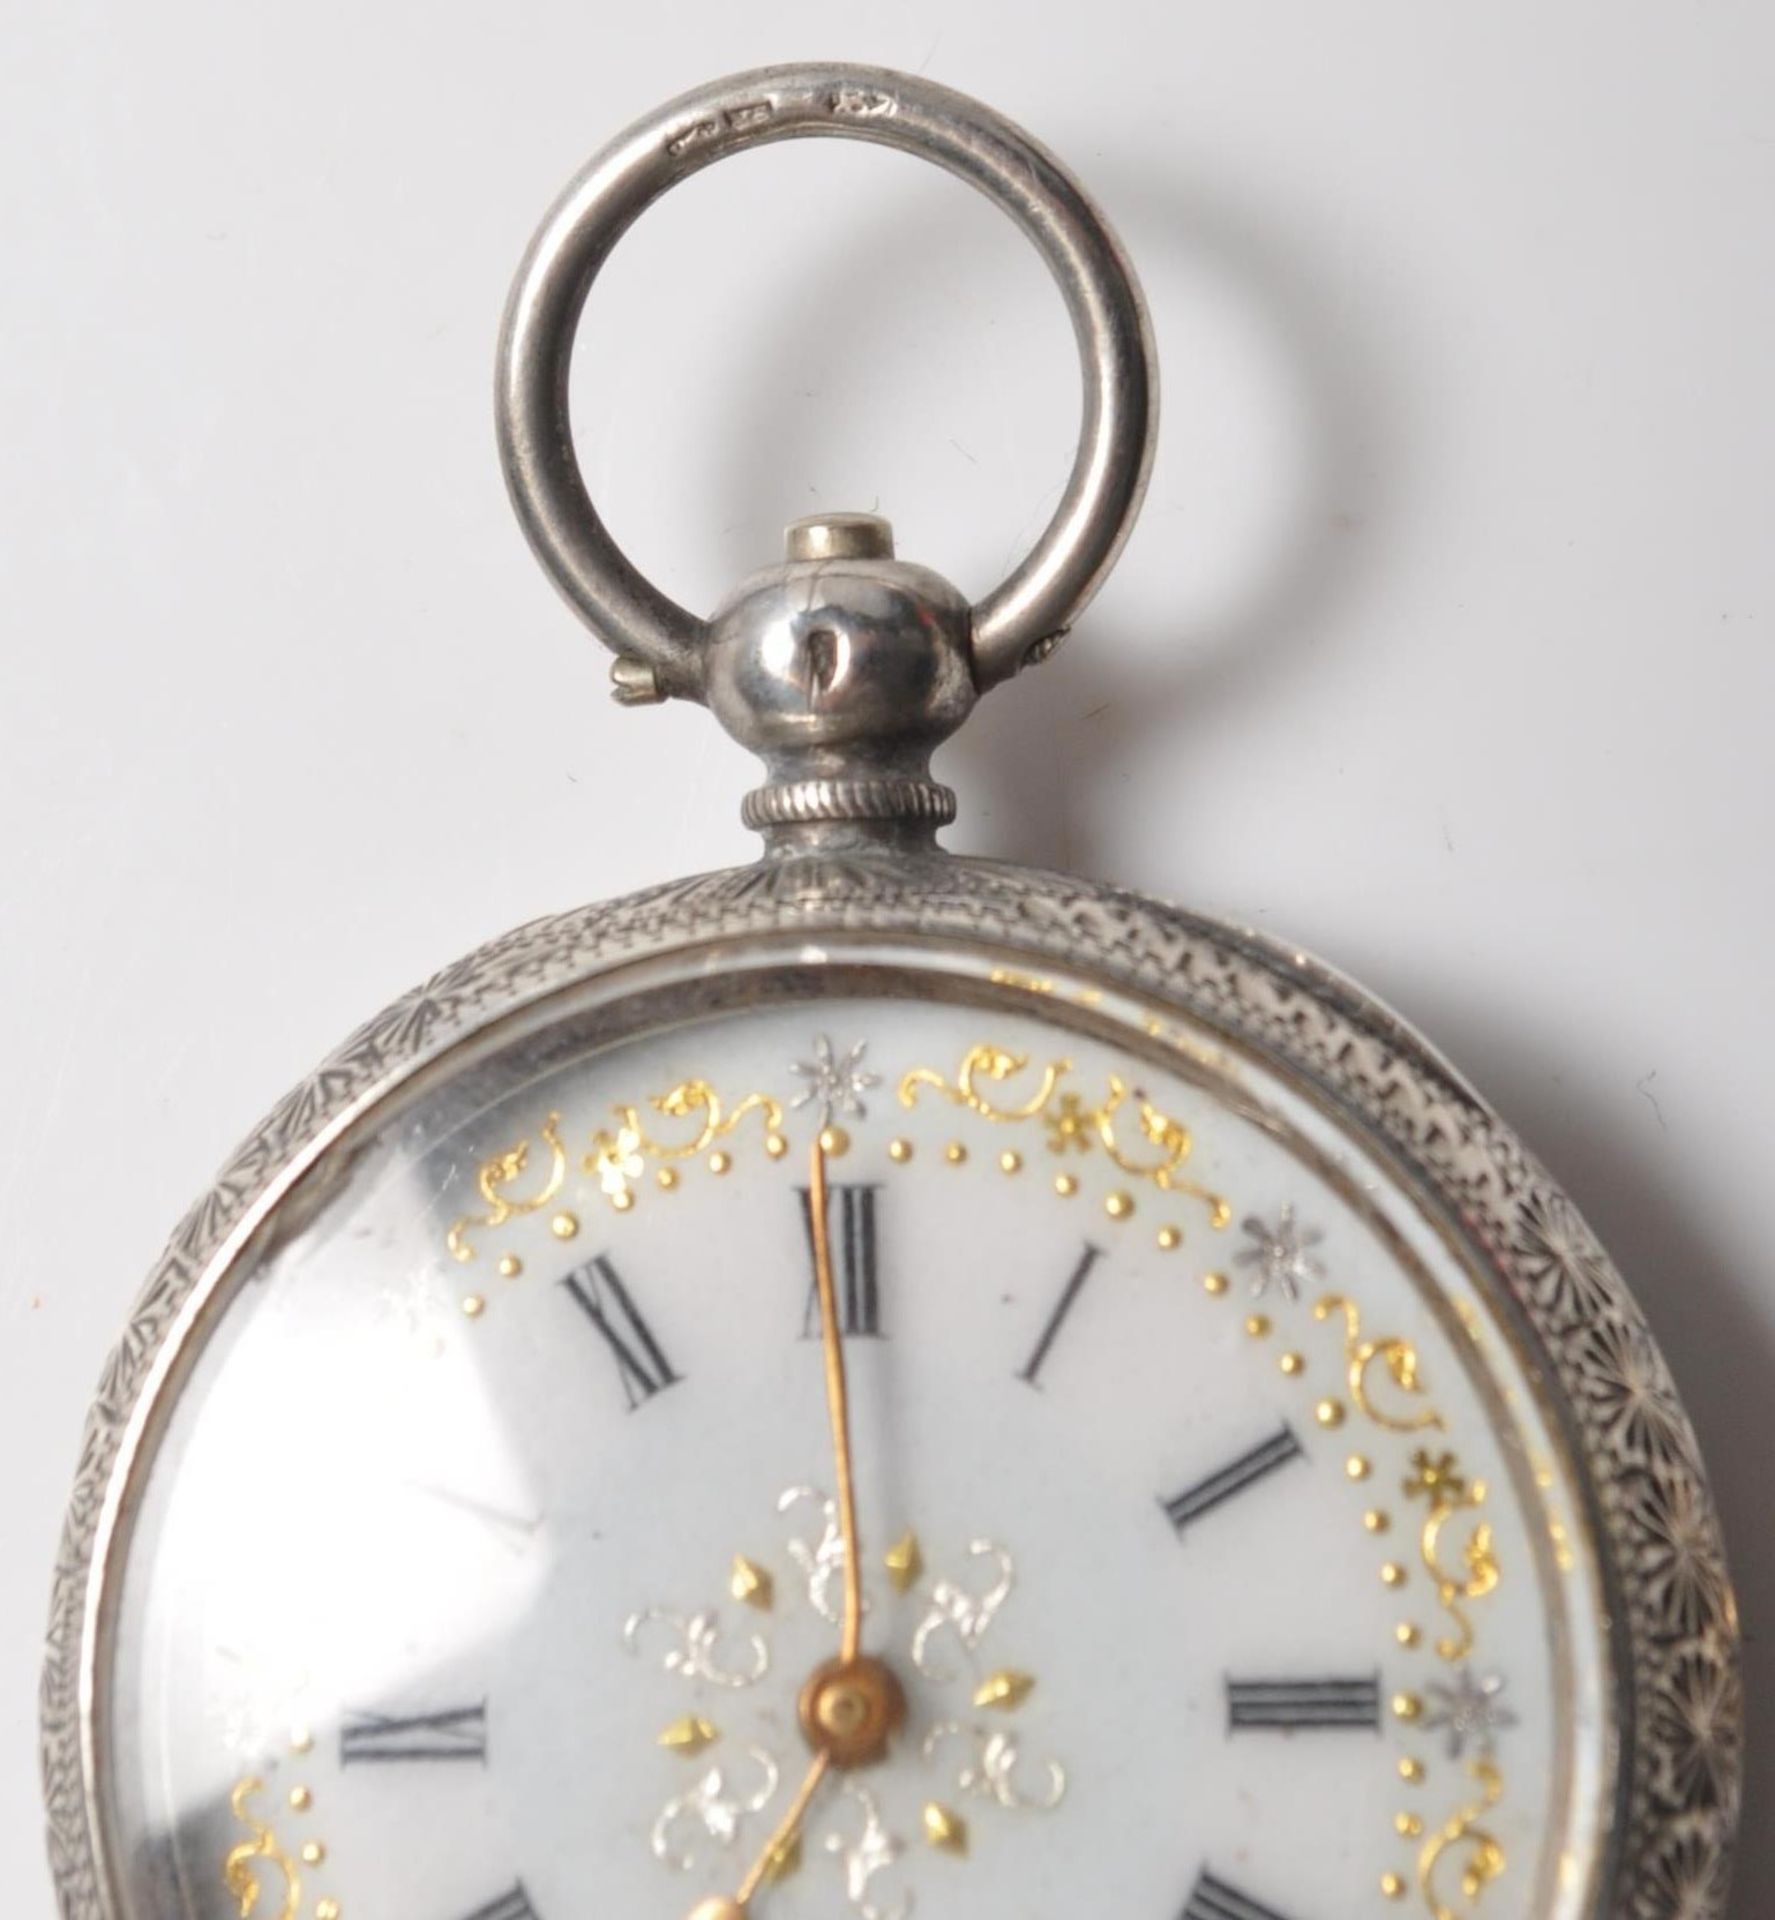 LADIES SILVER FOB WATCH AND KEY - Image 2 of 6